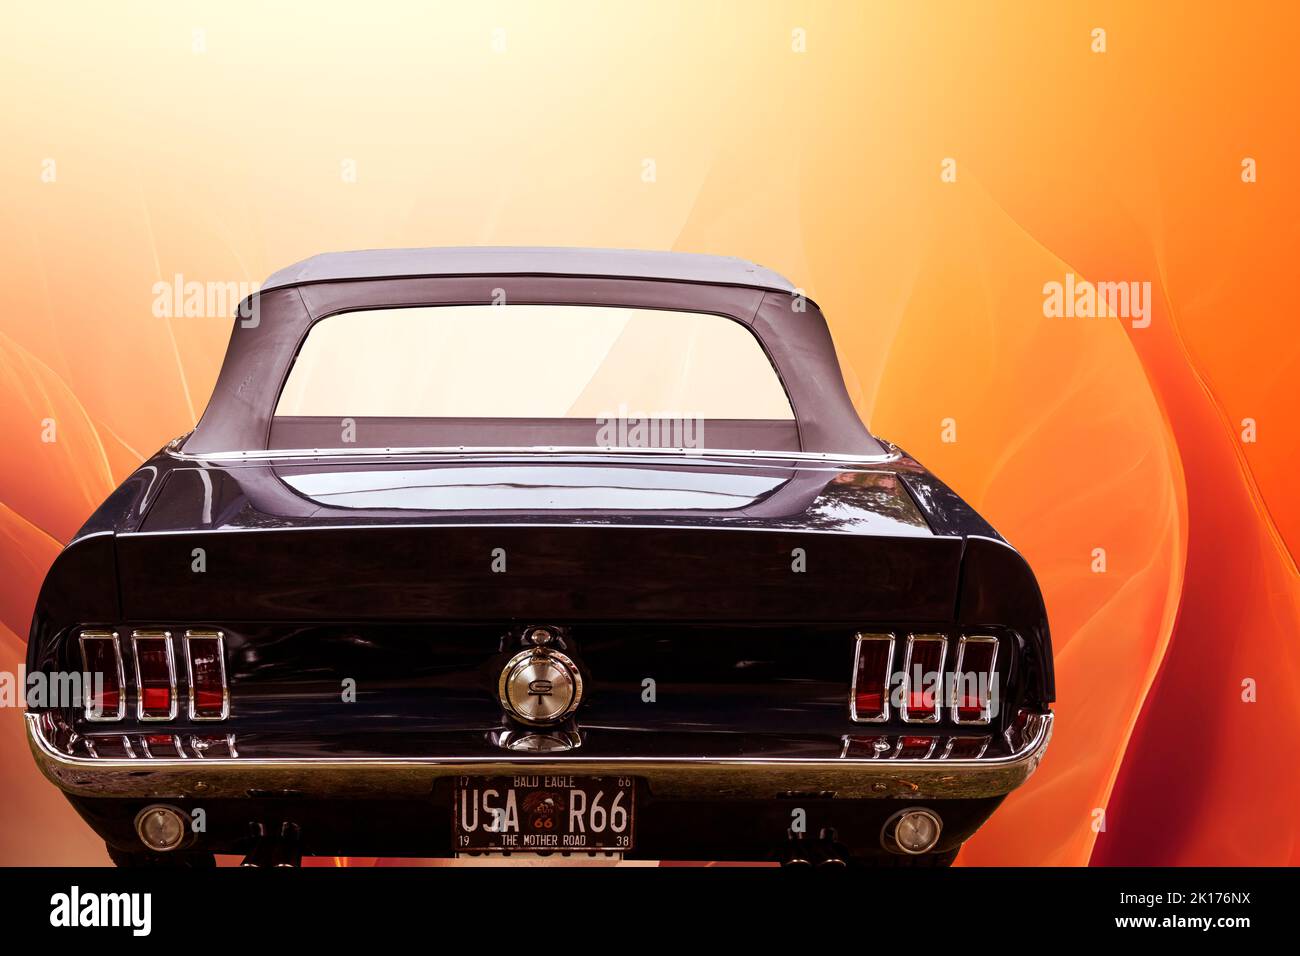 Ford Mustang rear view of dark painted American ponycar against surreal orange background , vehicle location Lehnin, Germany, September 11, 2022. Stock Photo